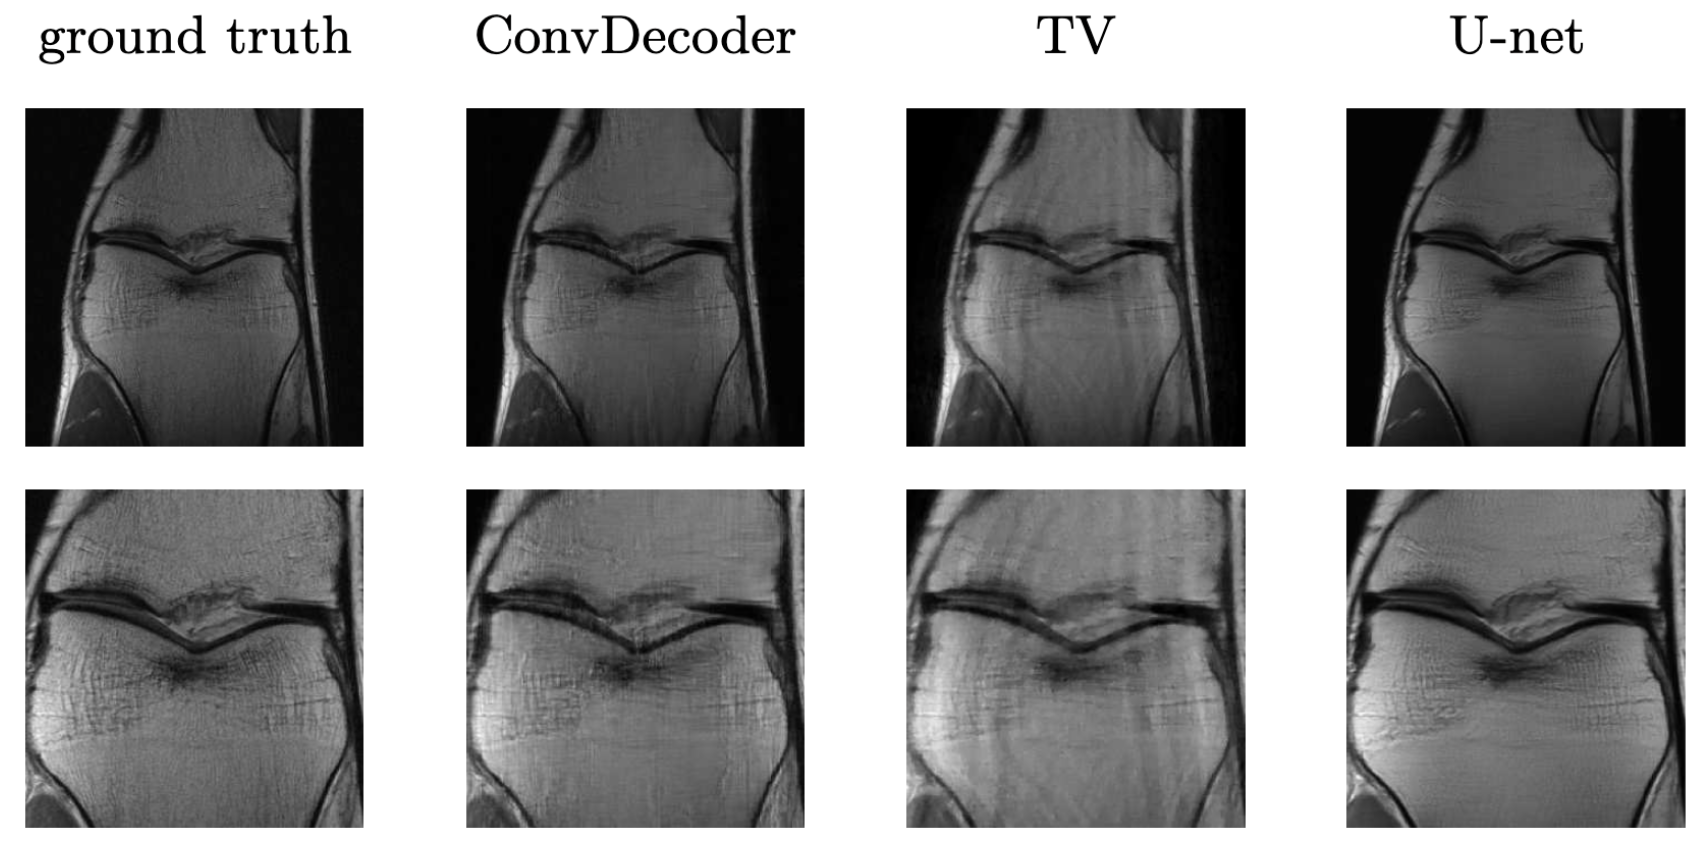 Comparison of the untrained ConvDecoder with the U-Net MRI, and total-variation regularized compressed sensing. Reconstructions of knee-MRI at 4x acceleration. The second row is a zoomed in version of the first row. Figure reproduced from Darestani et al. 2020.